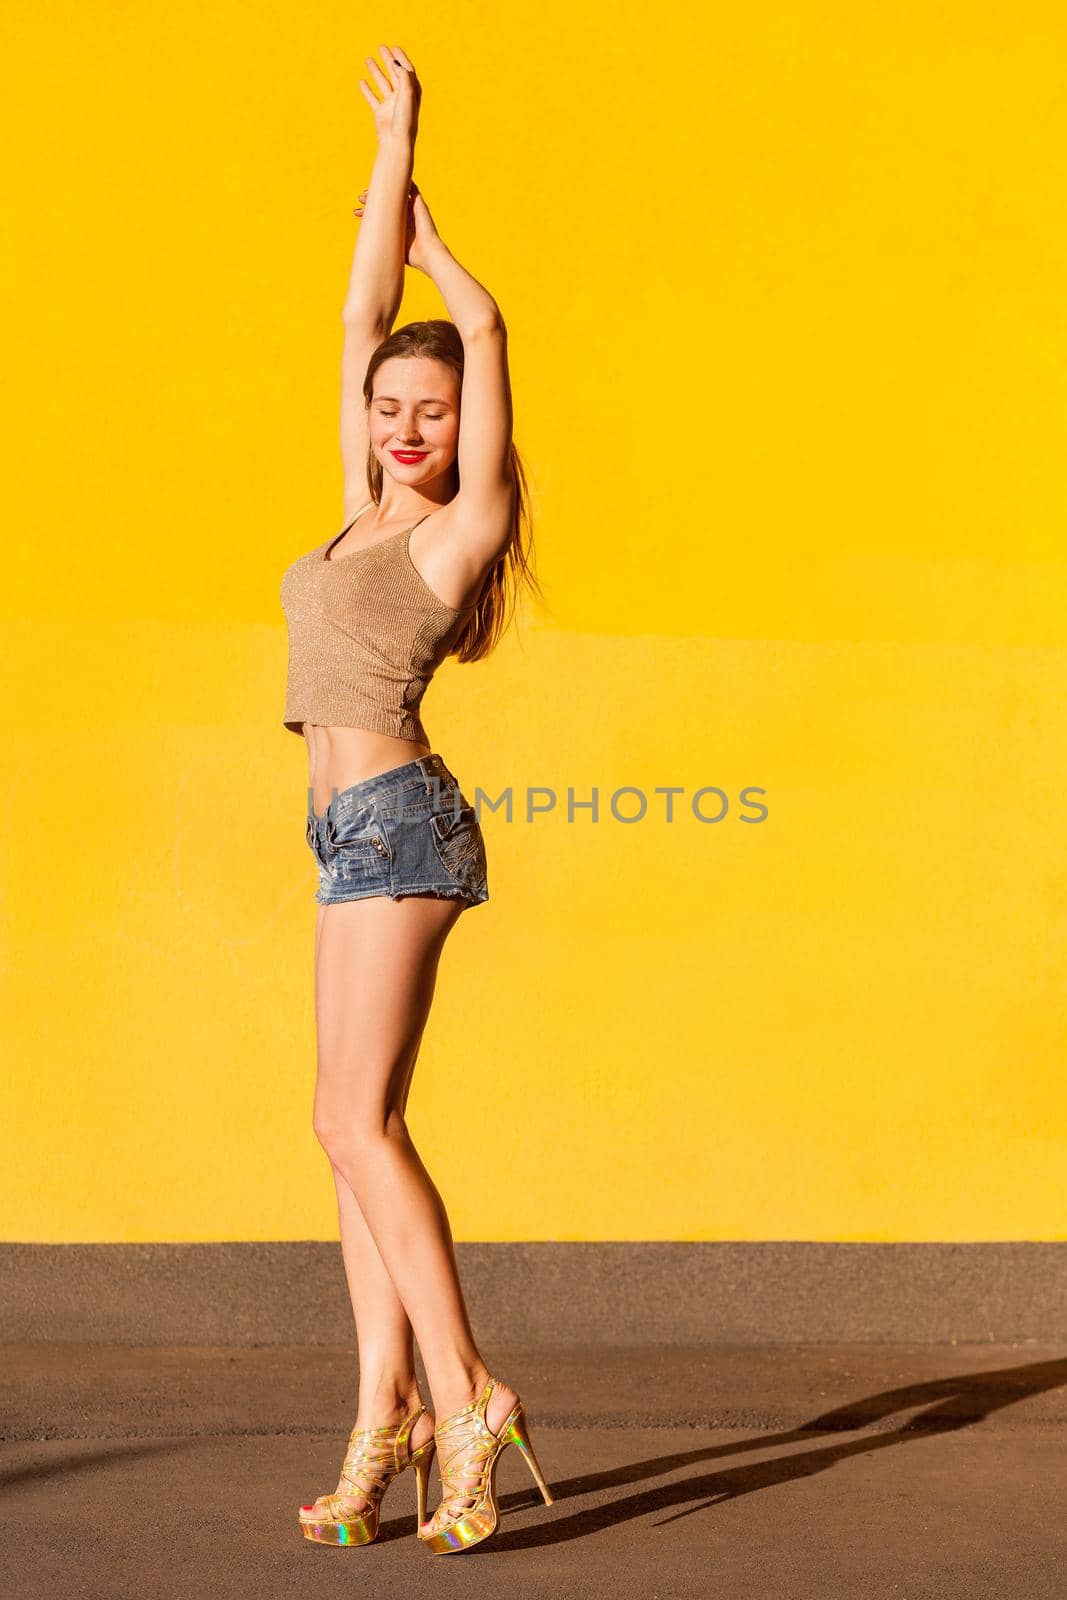 Very hot young freckled model beckoned you. Sensual brunette passionately closed eyes and hands up. Isolated on yellow background. Studio shot